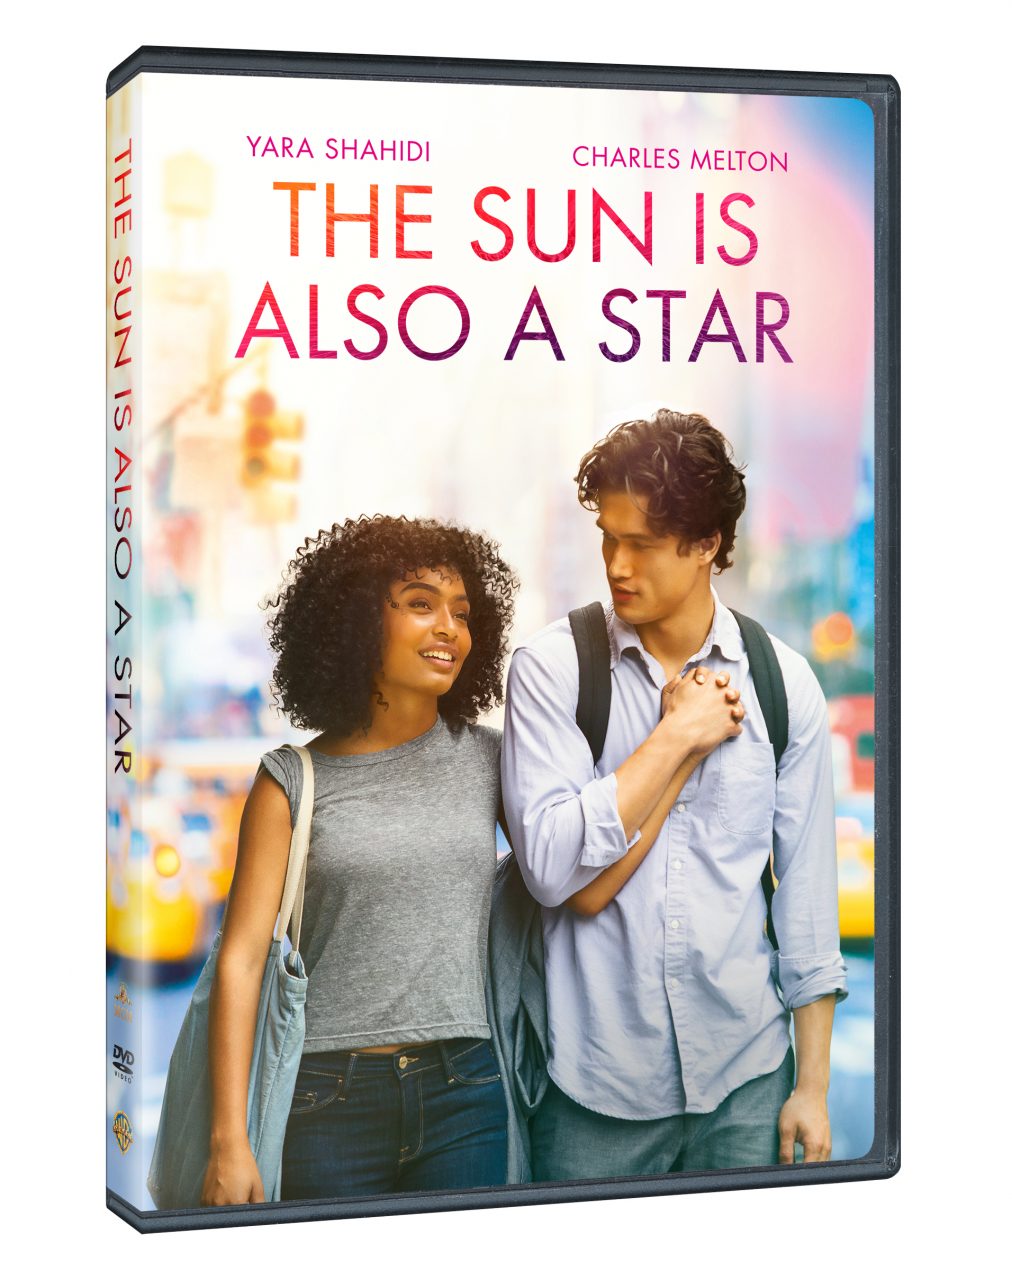 The Sun Is Also A Star DVD cover (Warner Bros. Home Entertainment)